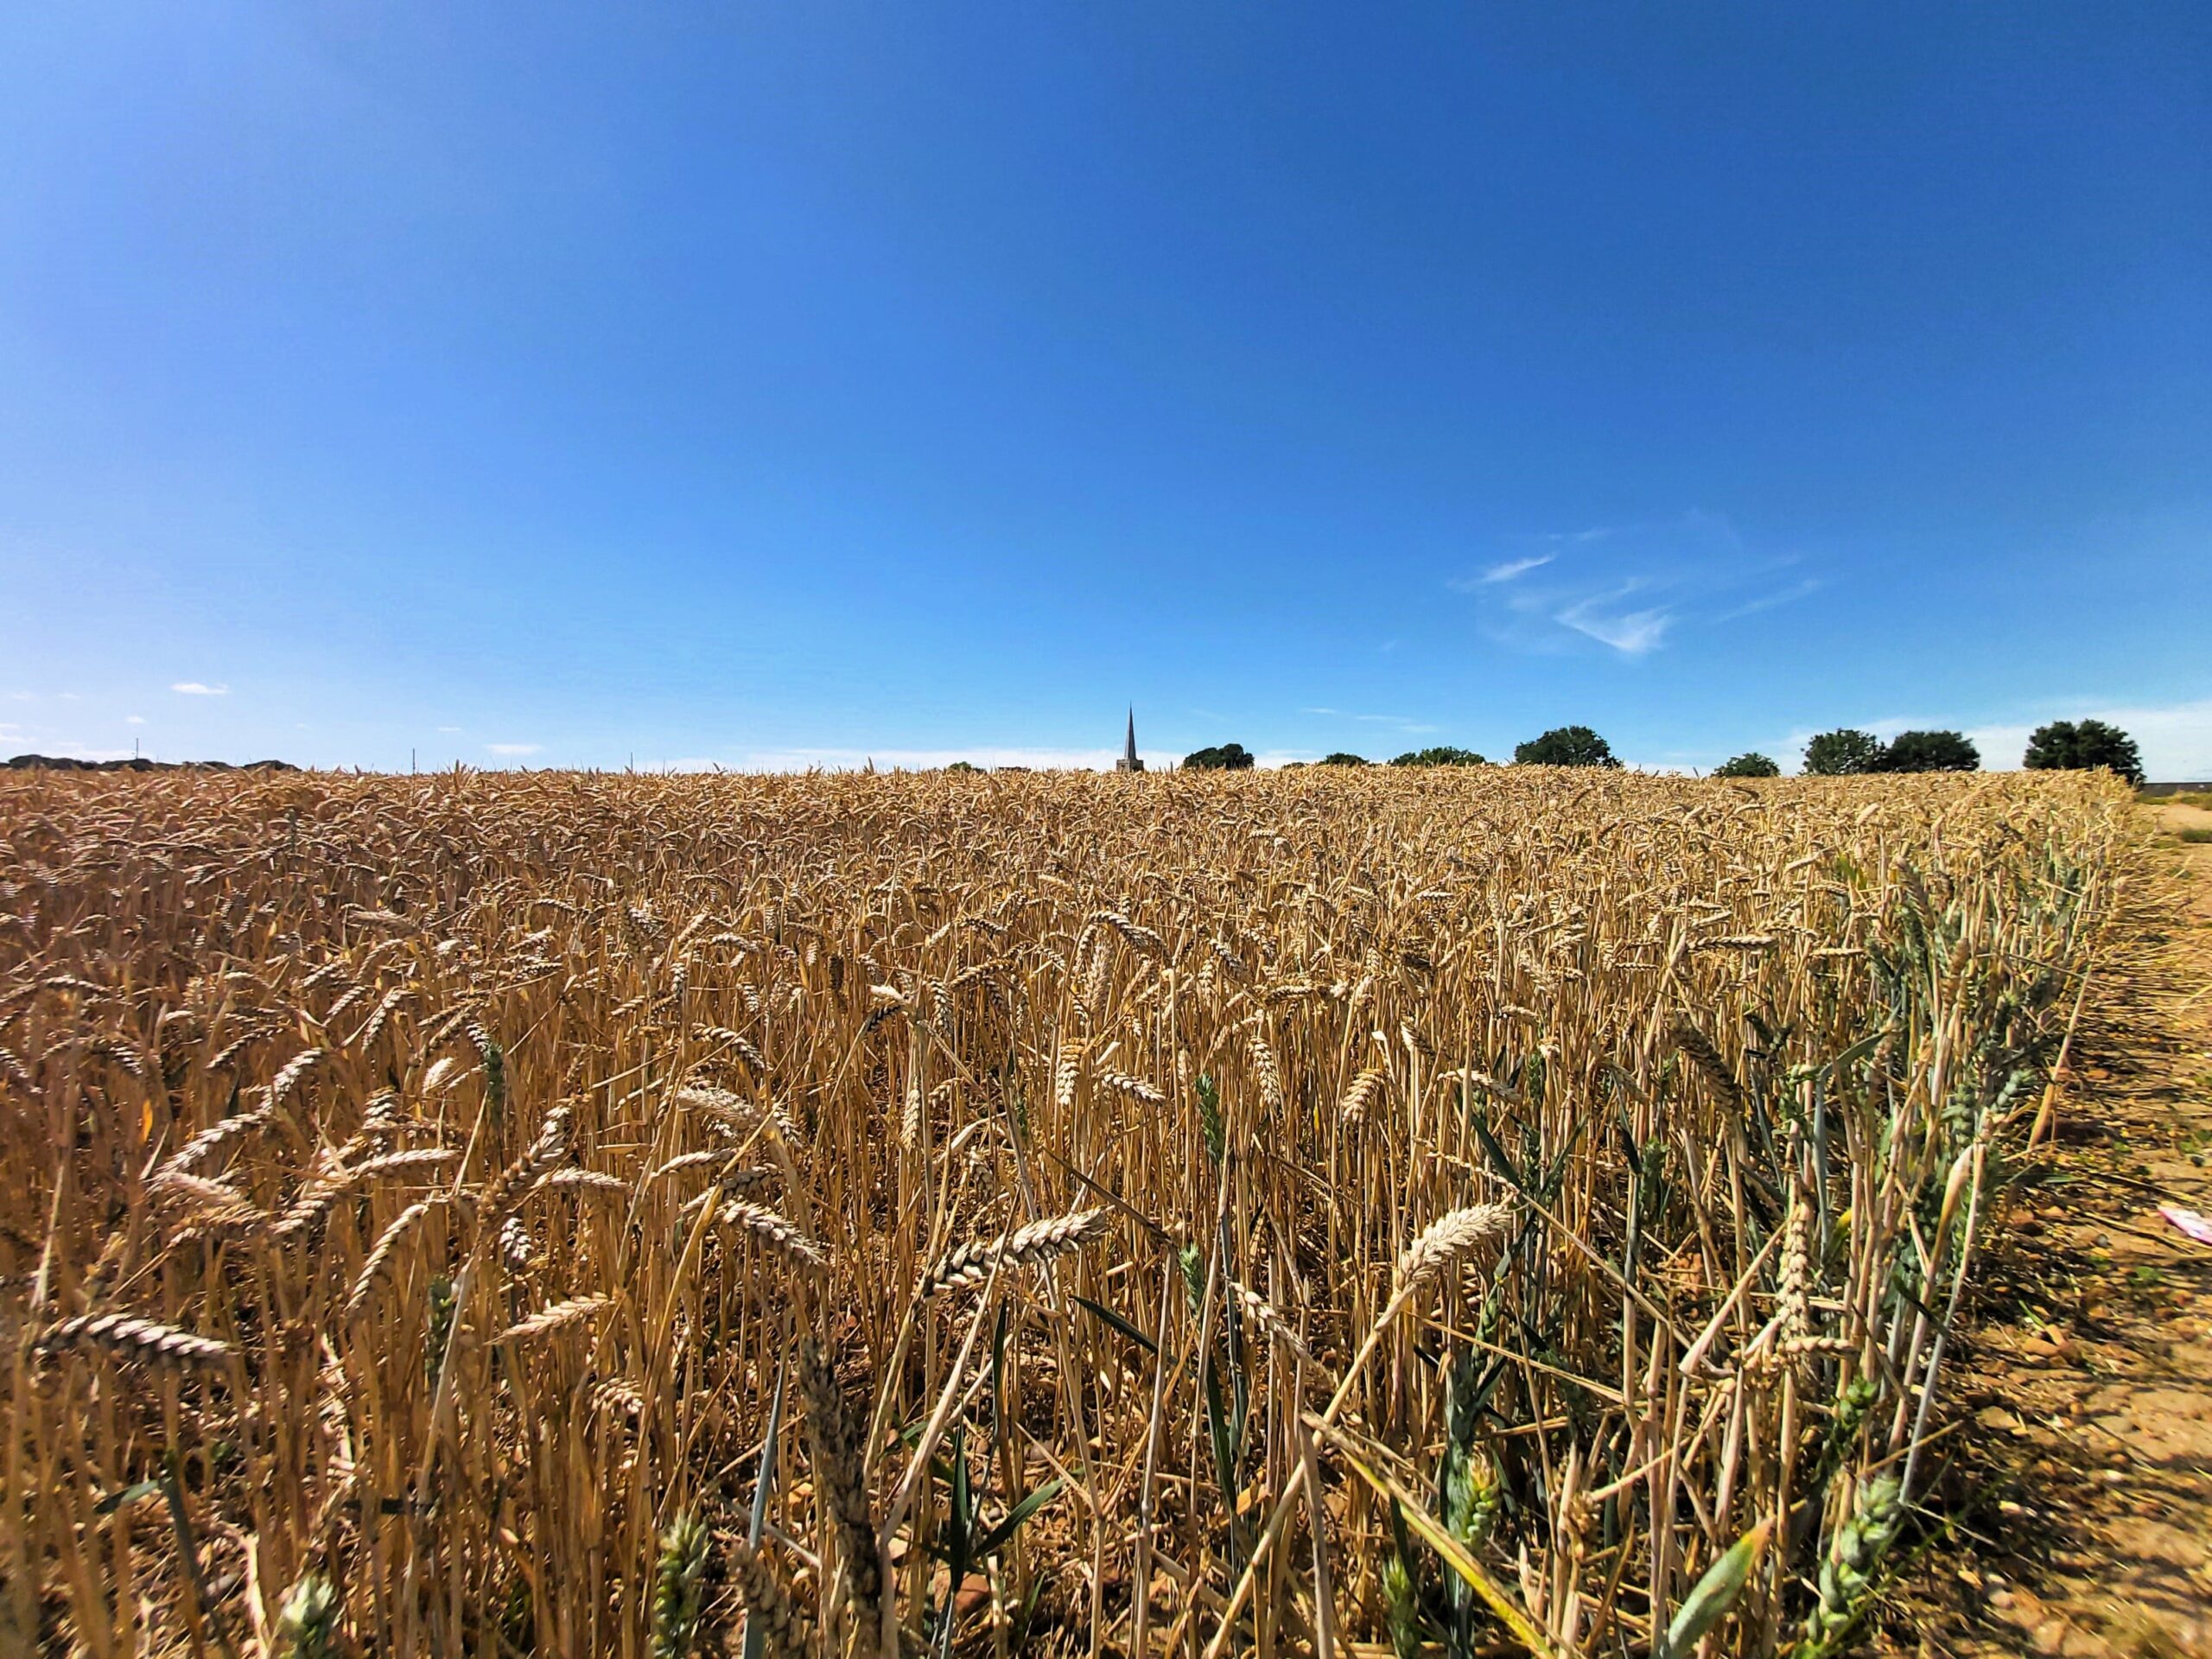 A cornfield with a church spire in the distance in Hoo, Medway, England